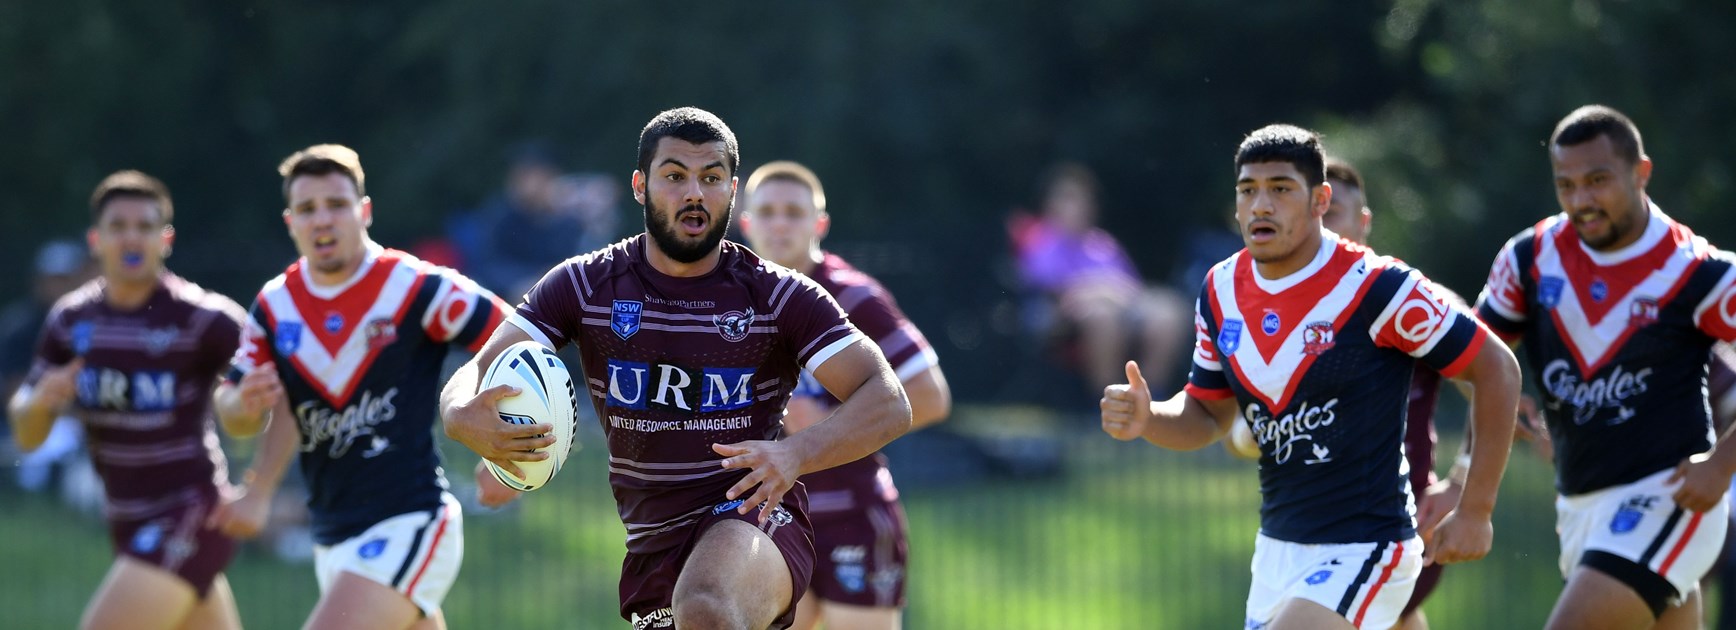 Manly record second win in Jersey Flegg